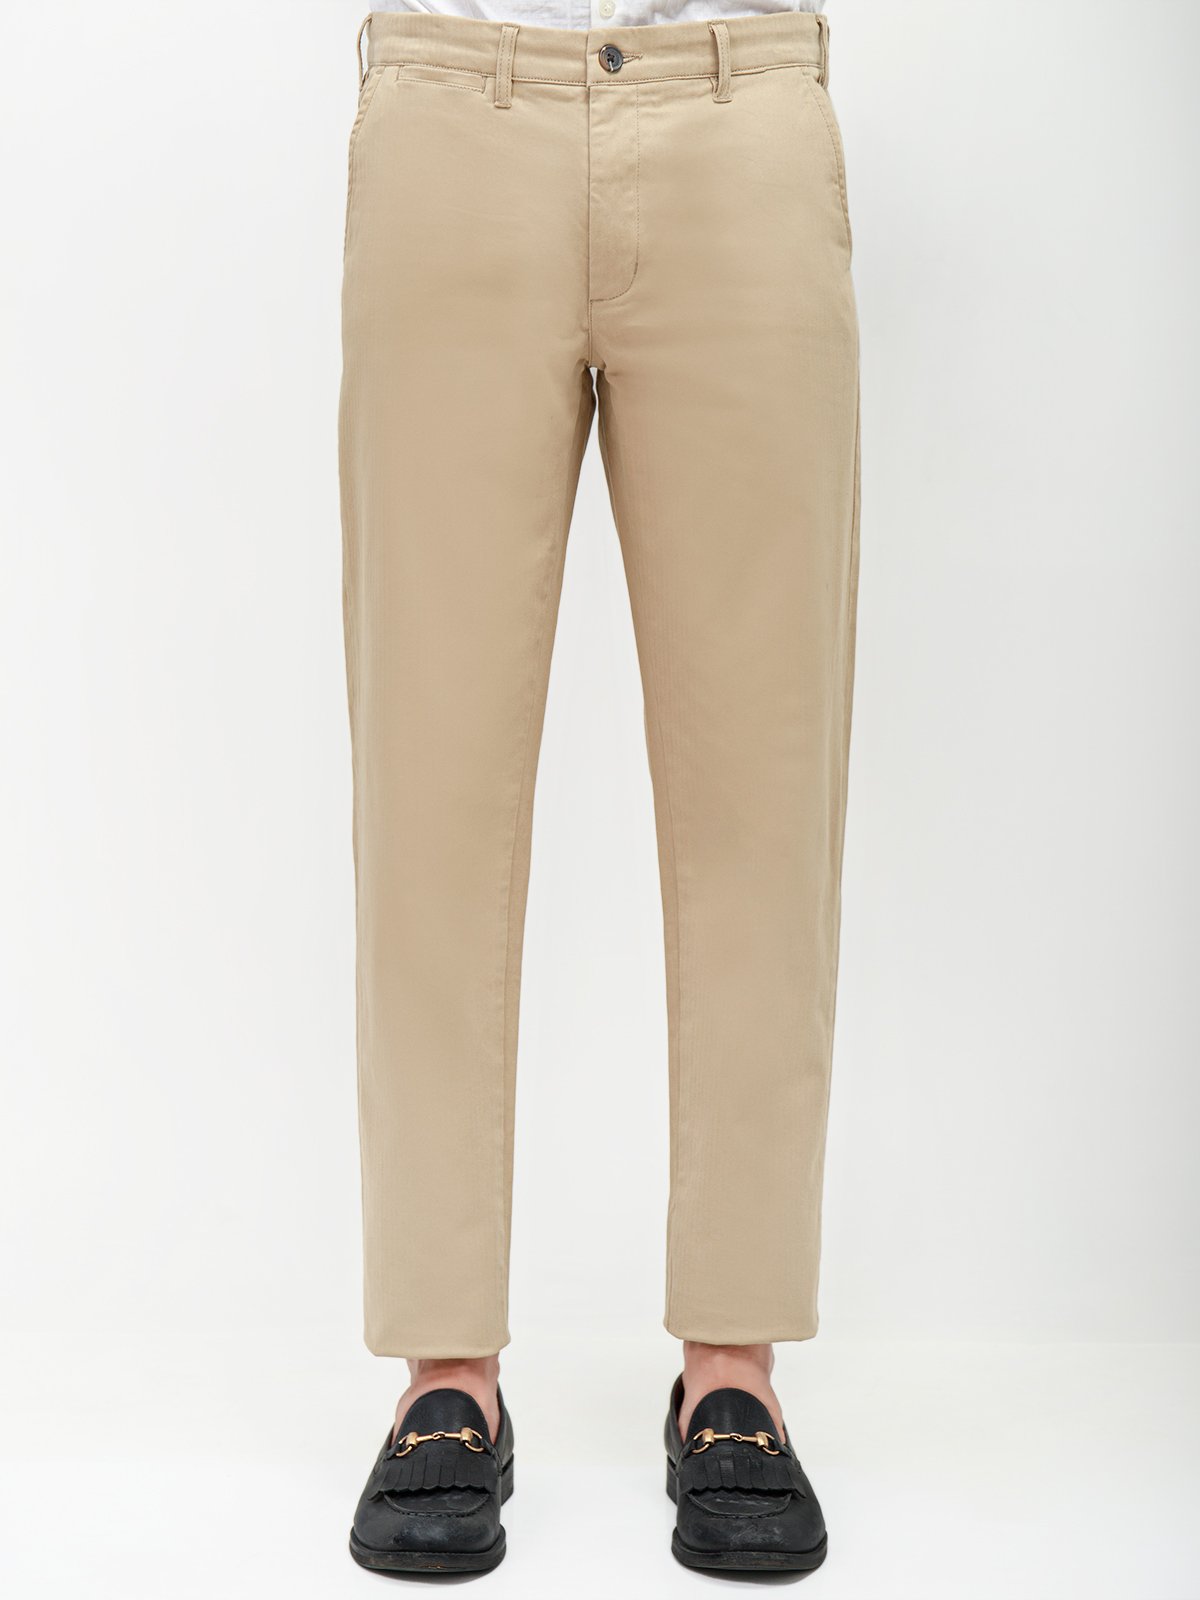 Men's Beige Chino Pant - EMBCP21-008